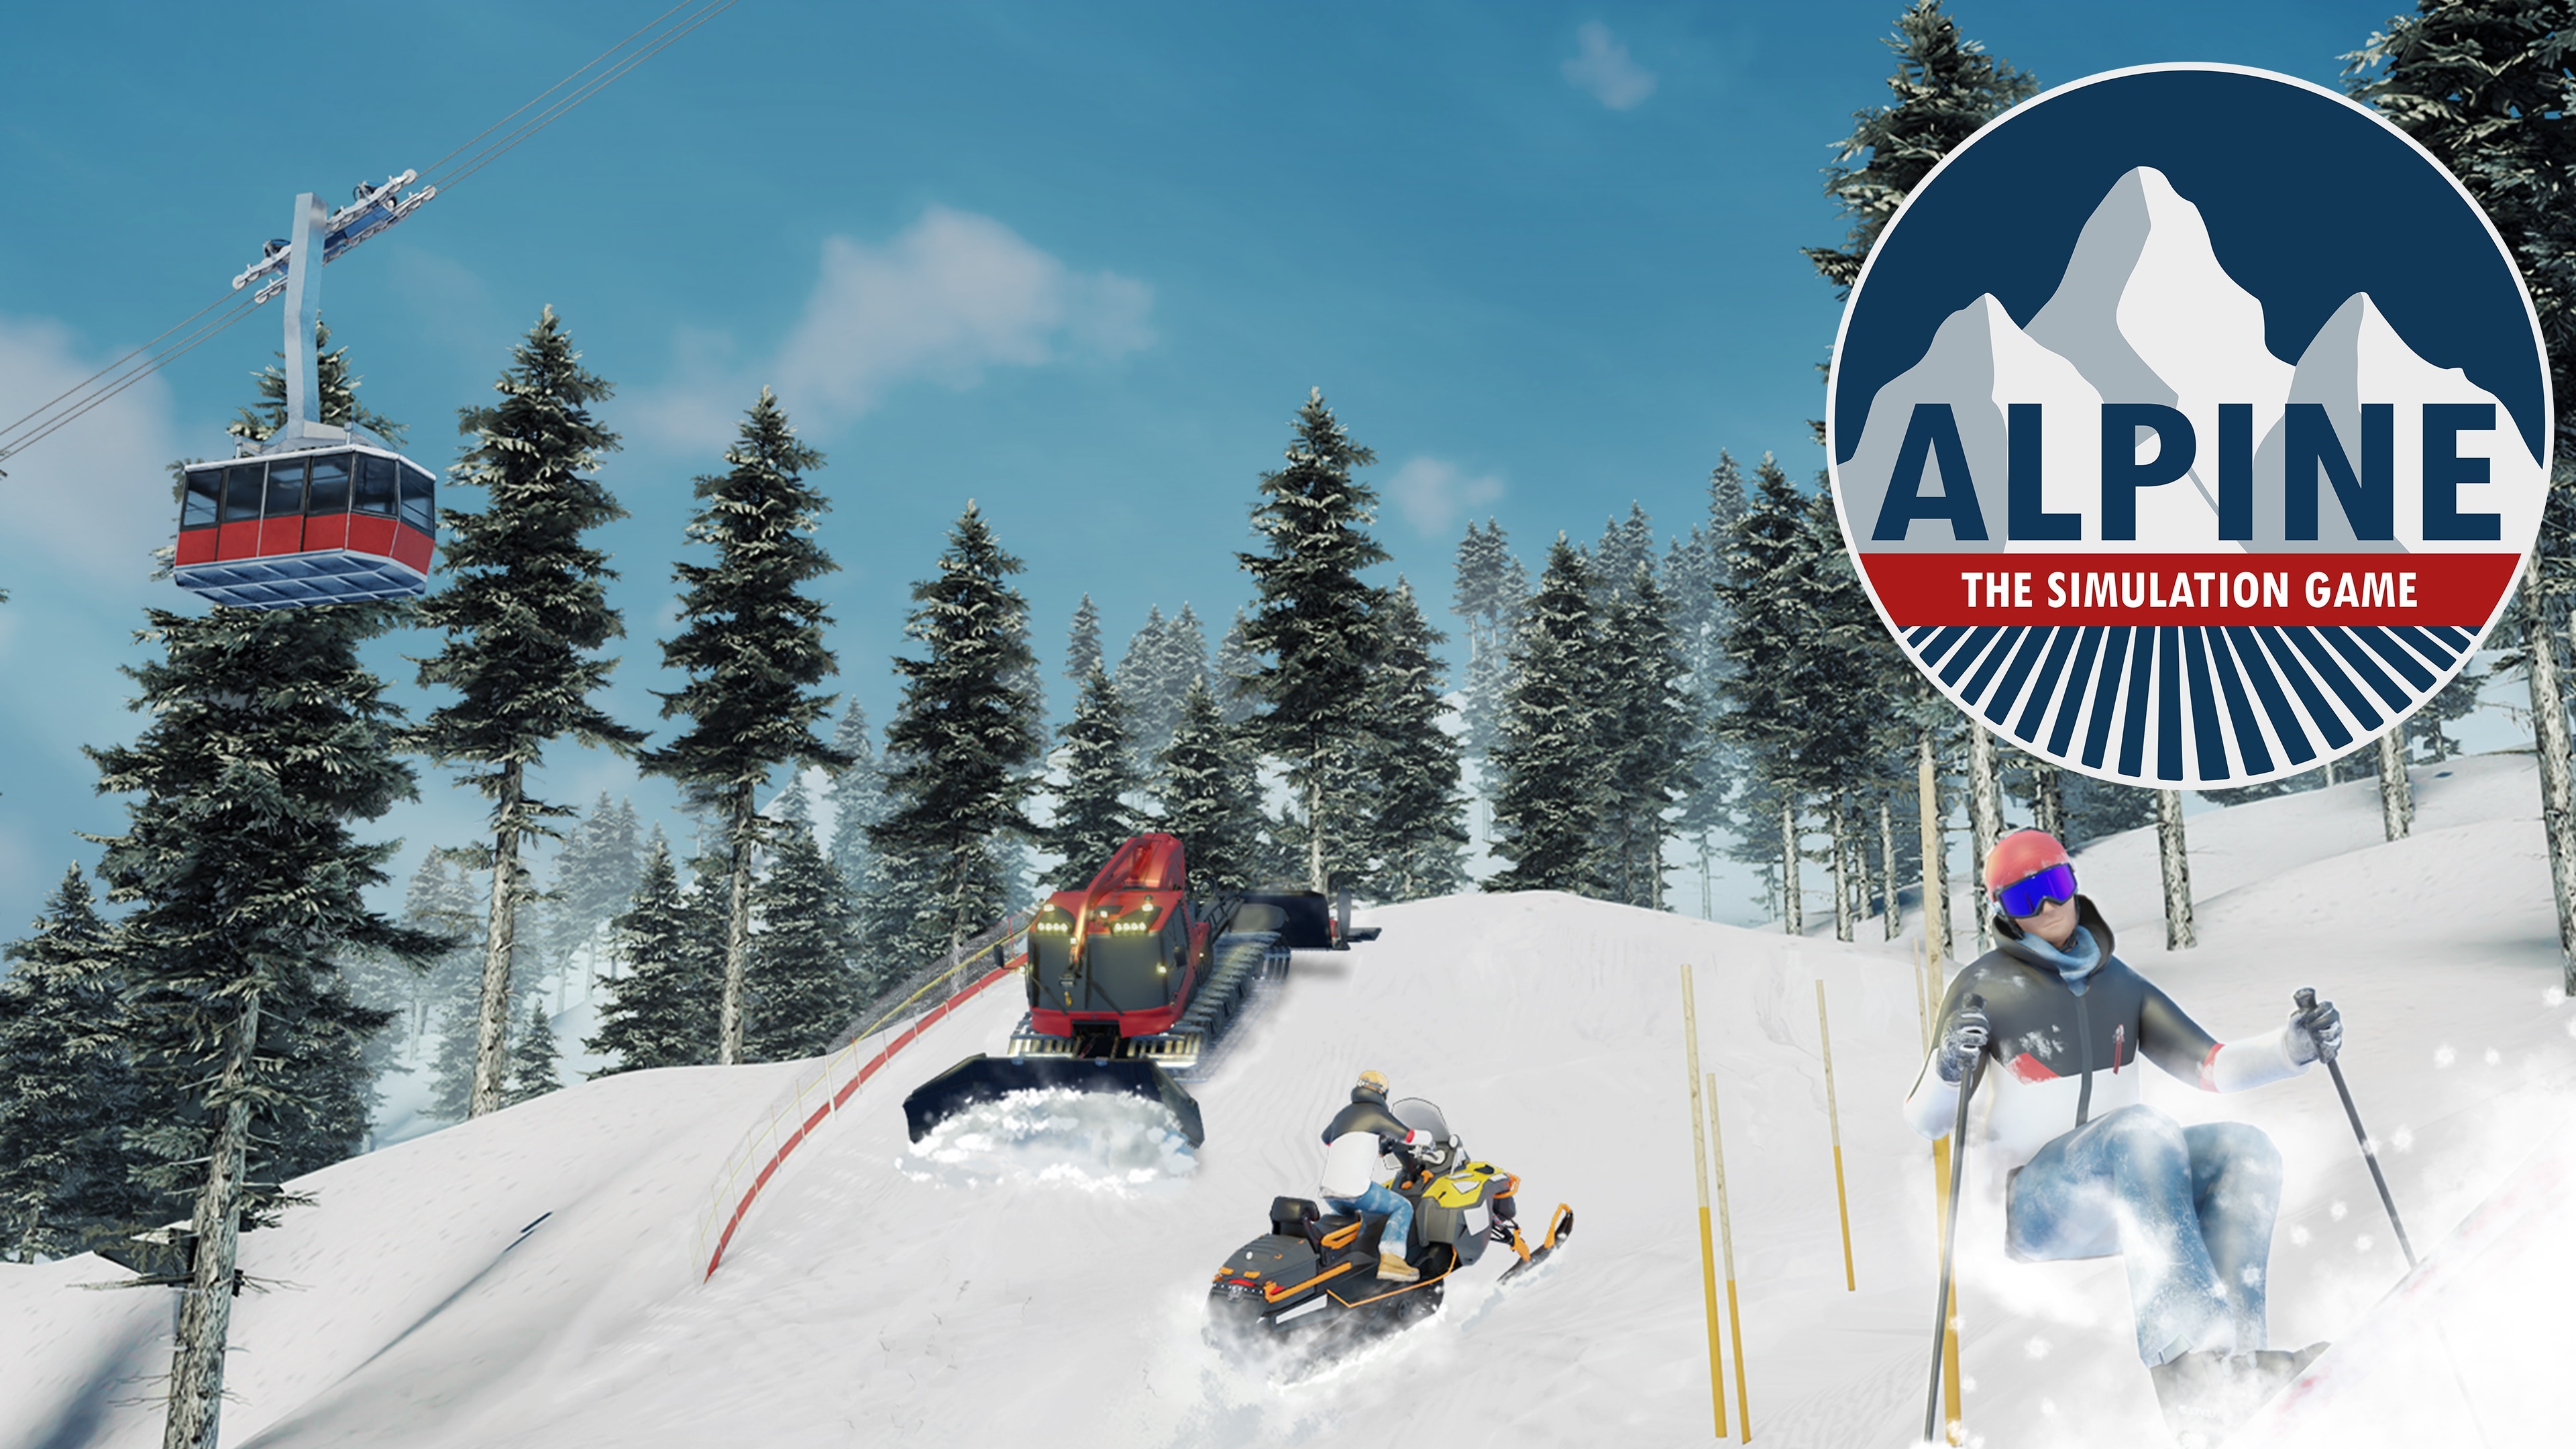 Simulation Game, Alpine, The simulation game, Ultimate experience, 3840x2160 4K Desktop